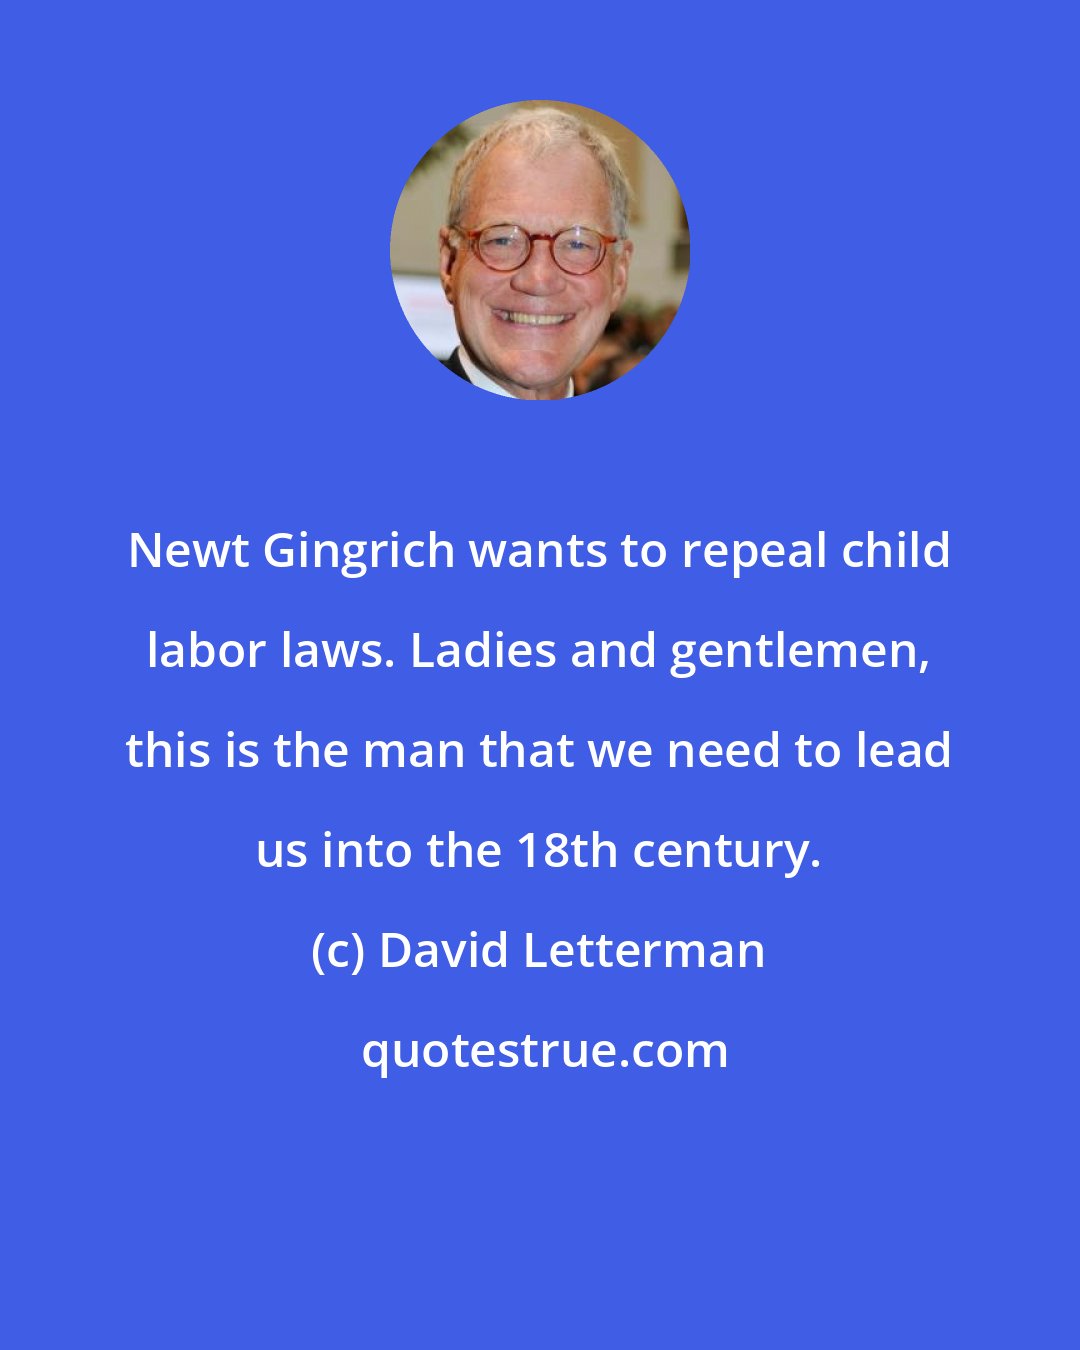 David Letterman: Newt Gingrich wants to repeal child labor laws. Ladies and gentlemen, this is the man that we need to lead us into the 18th century.